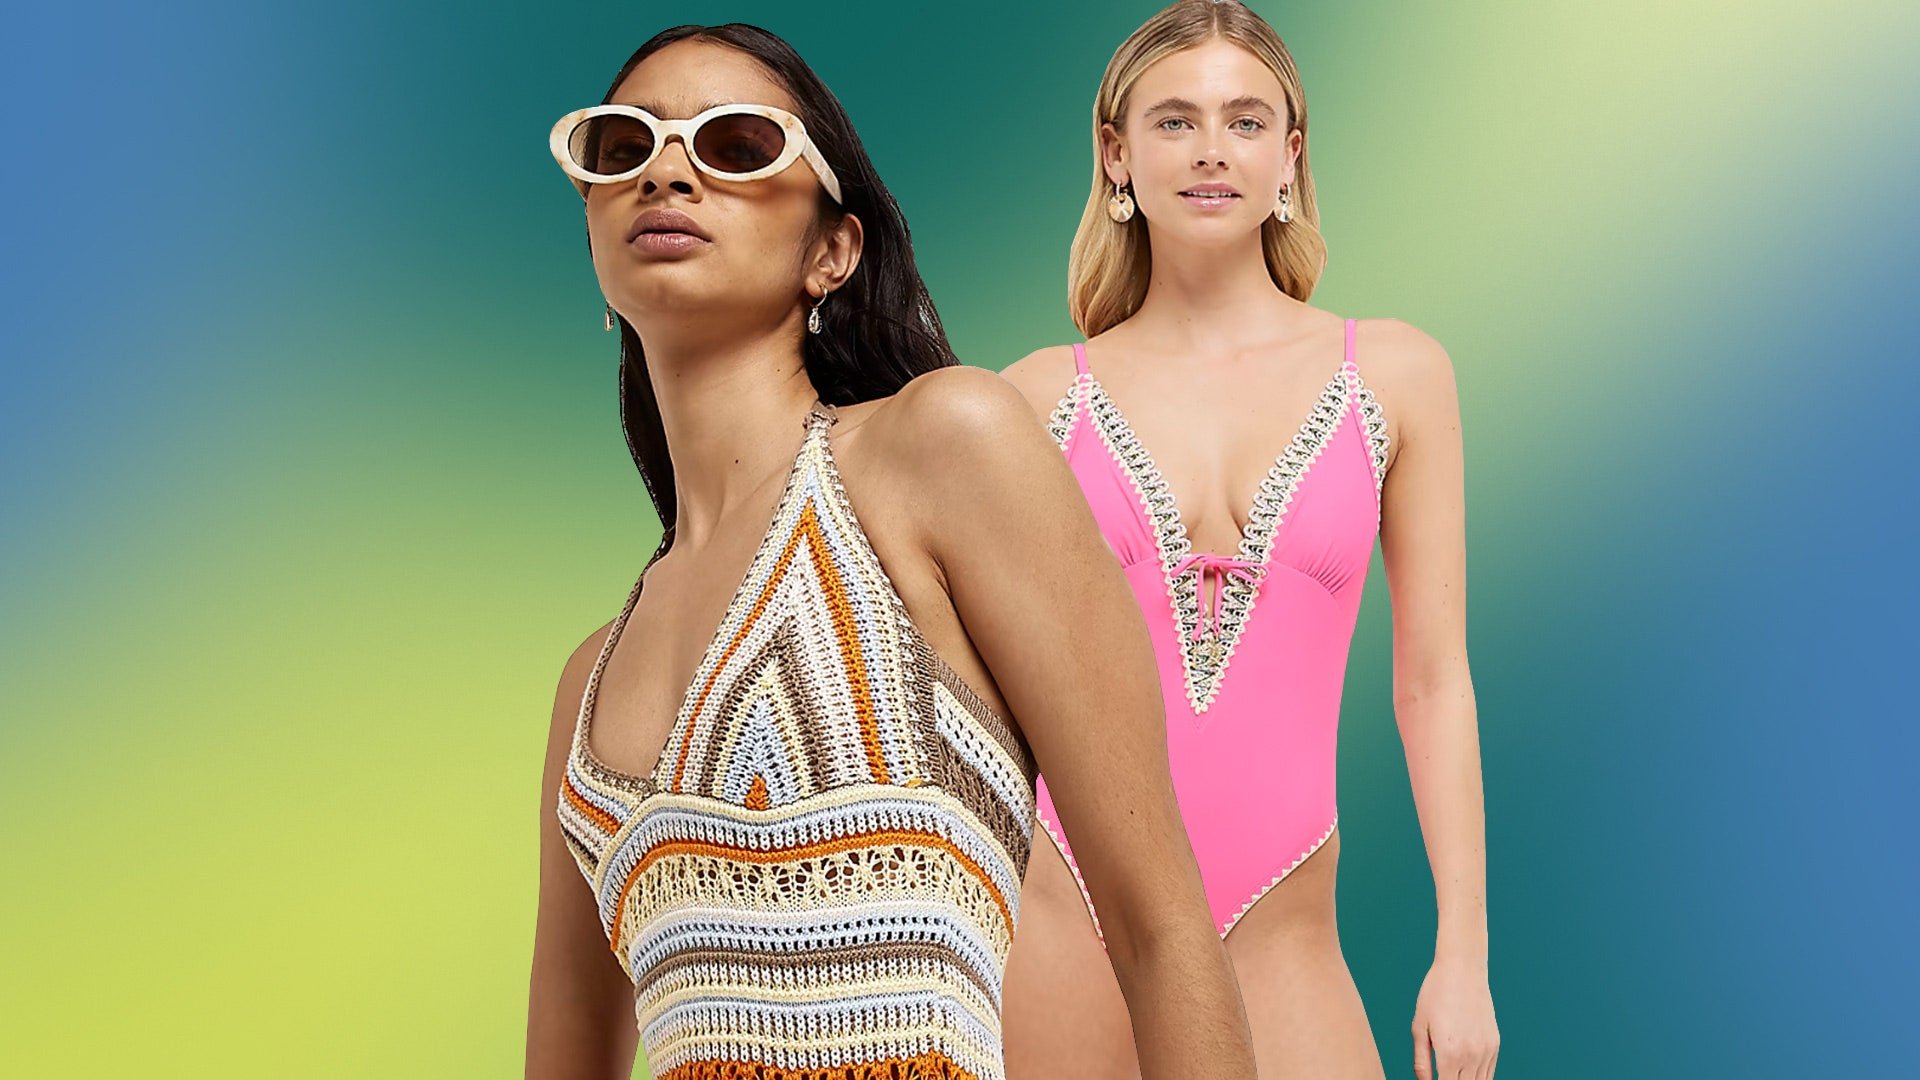 These River Island discount codes offer 20% off in time for the weekend heatwave